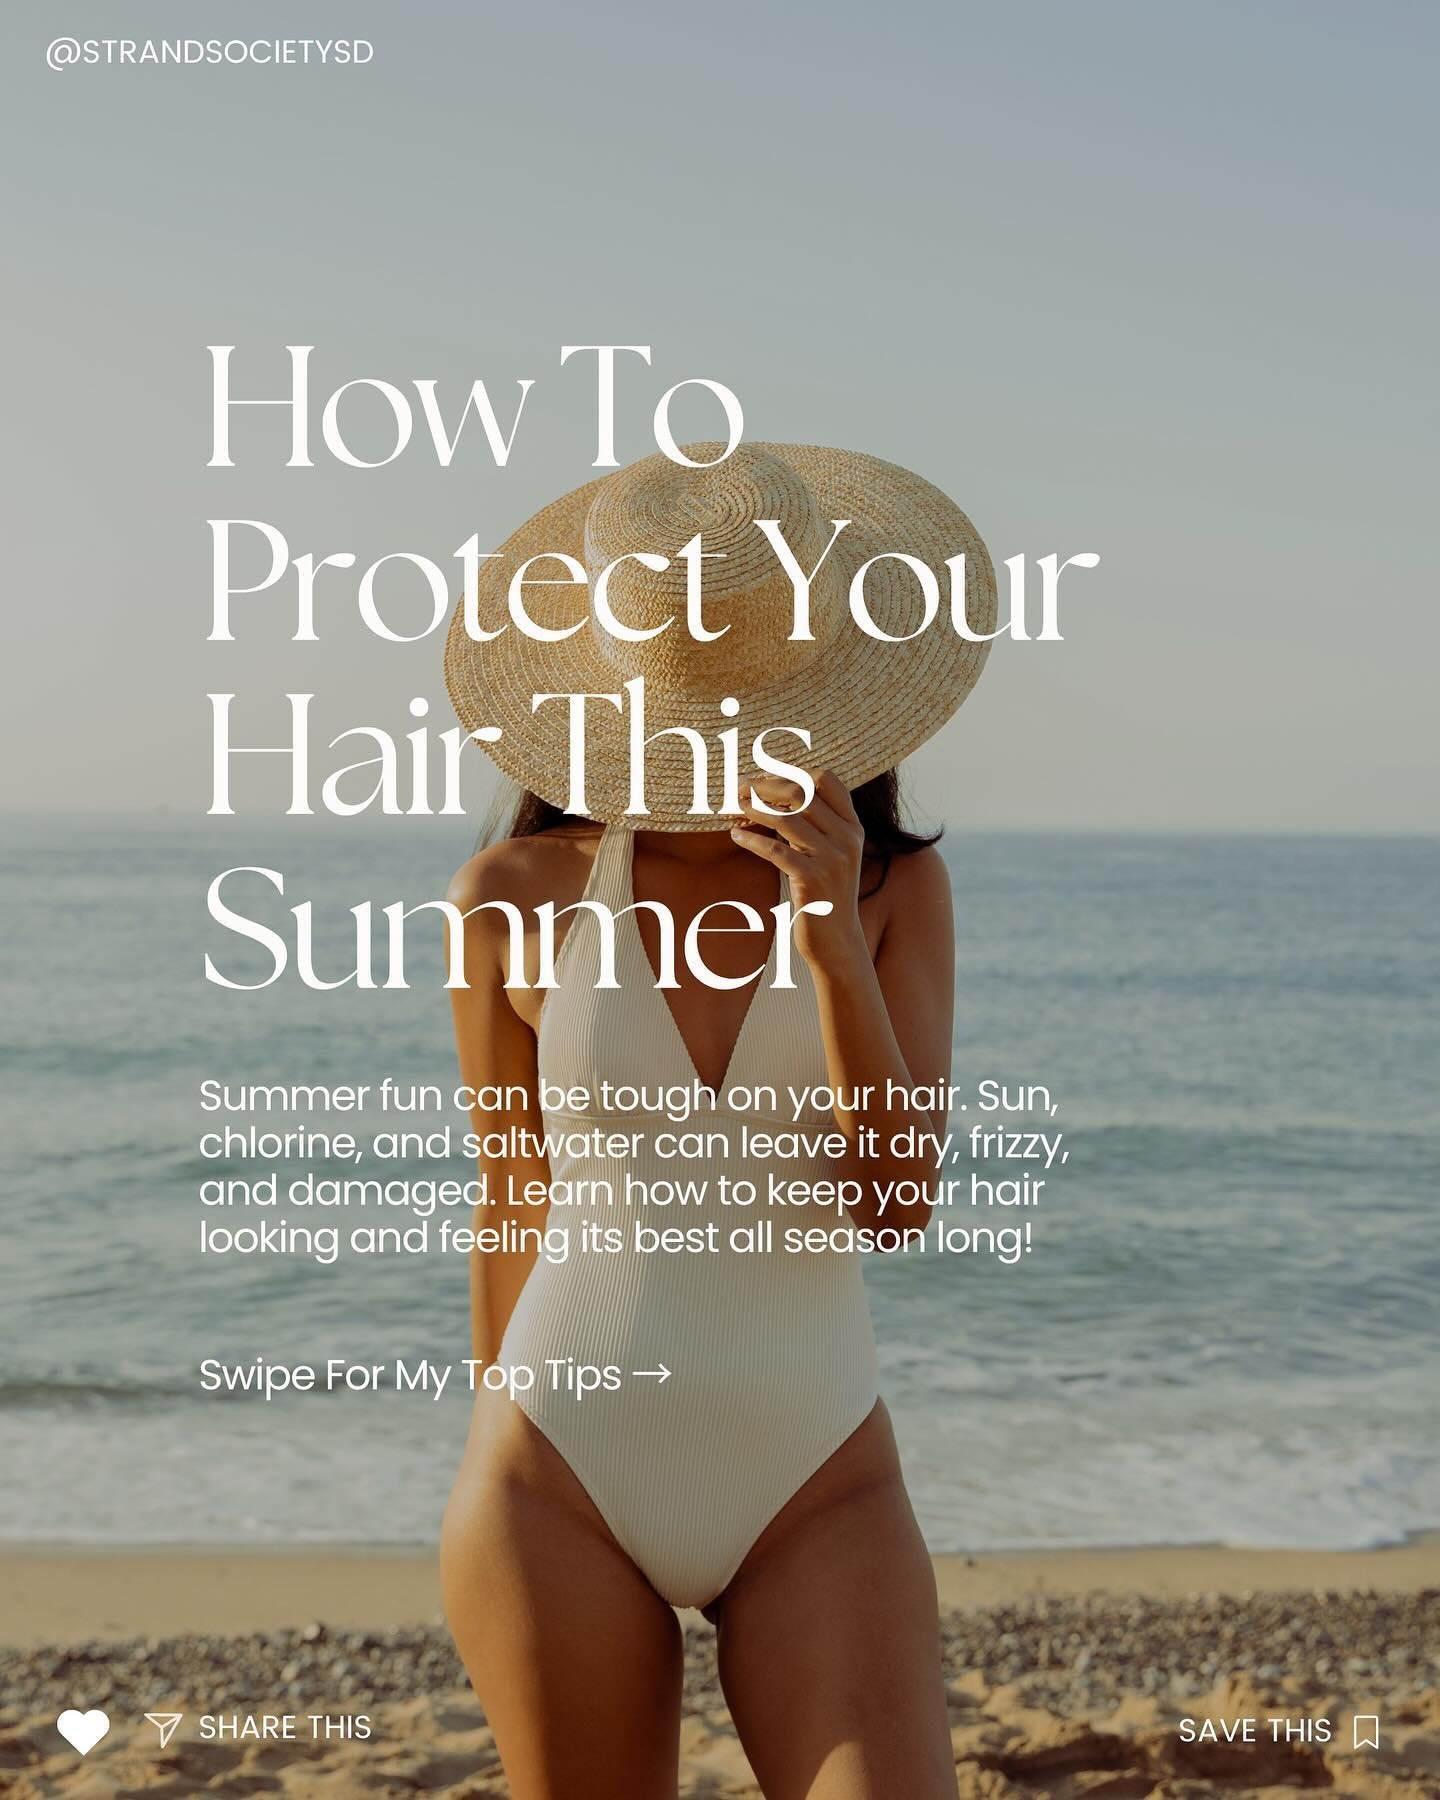 Beat the Summer Heat &amp; Protect Your Hair! ☀️

Worried about sun damage and dryness affecting your hair this summer?  We&rsquo;ve got you covered! ✨

Swipe through to discover our tips for keeping your hair healthy and vibrant all season long.  Fr